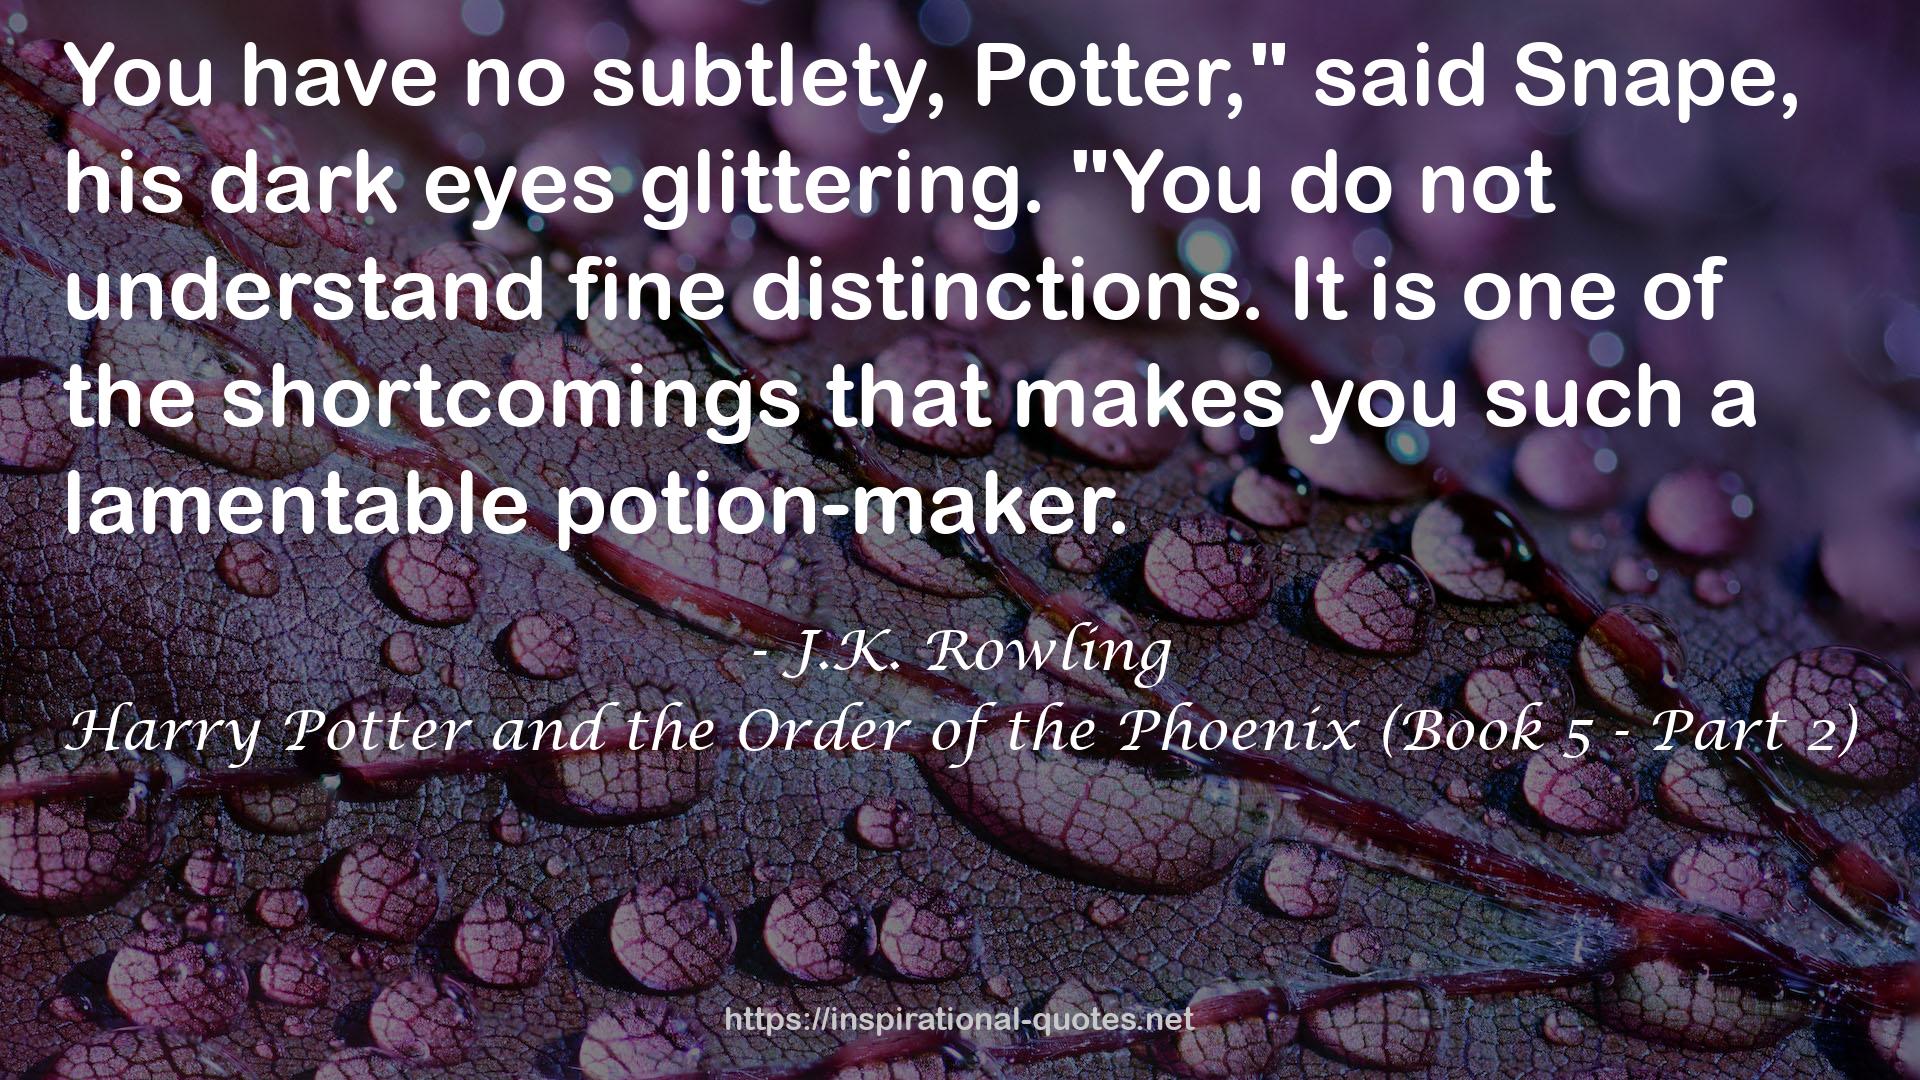 Harry Potter and the Order of the Phoenix (Book 5 - Part 2) QUOTES